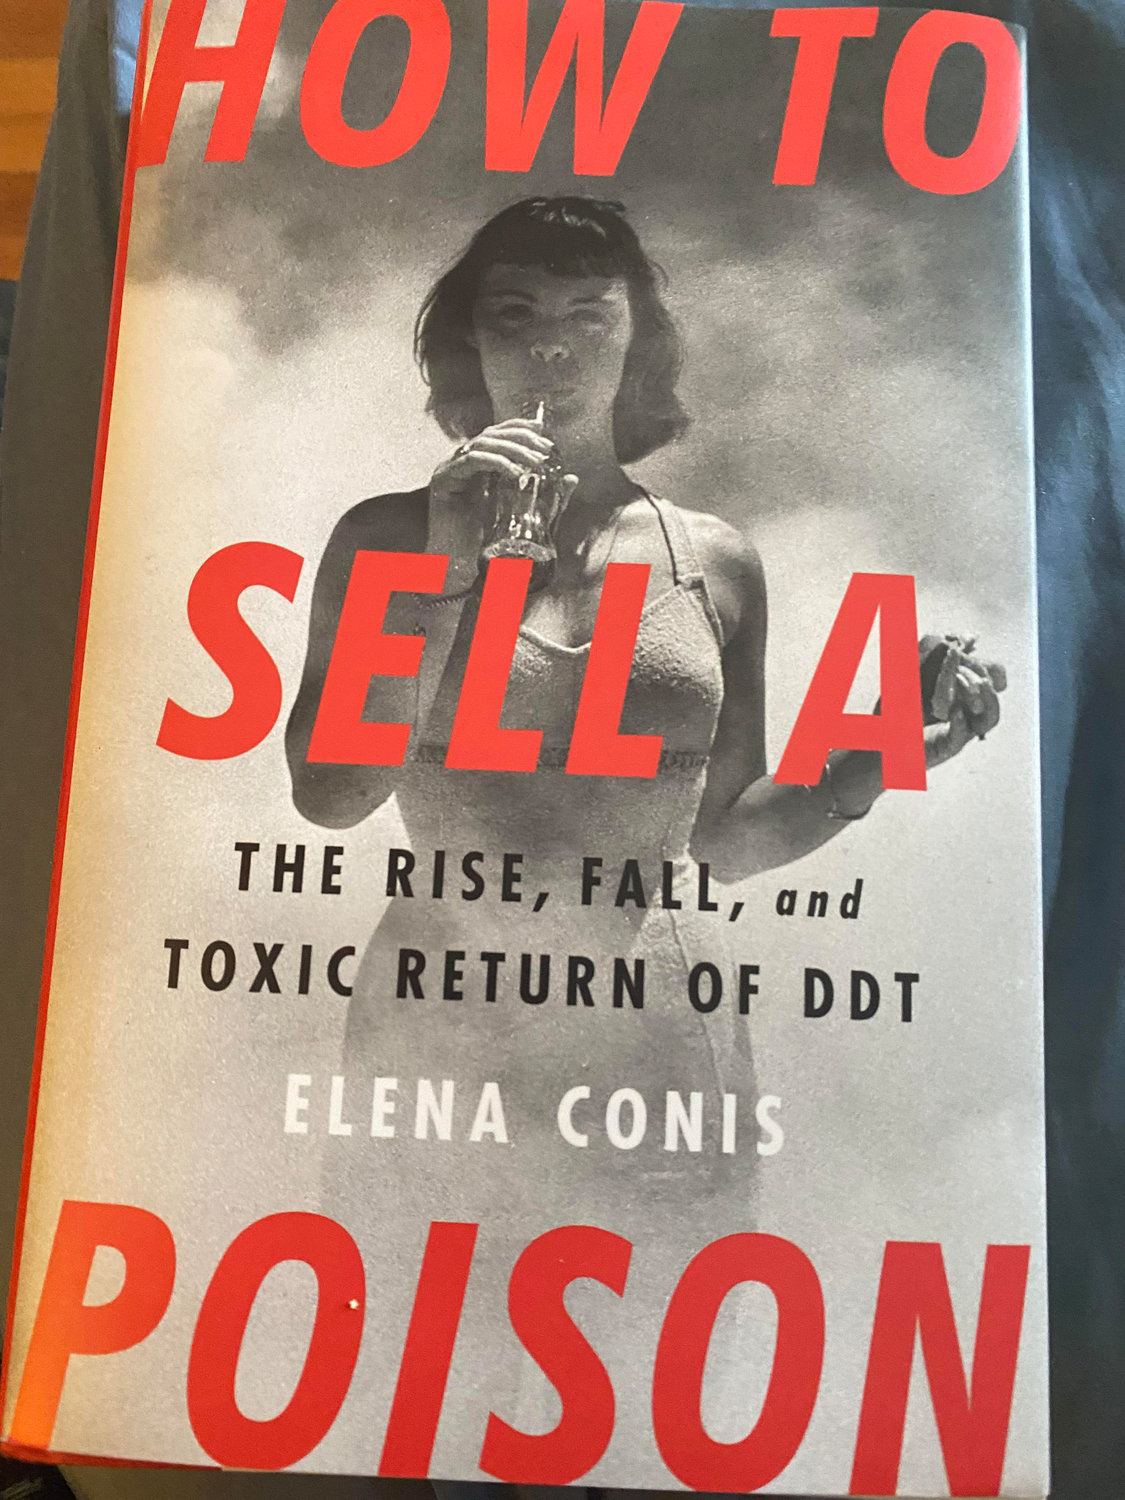 The  cover of Elena Conis's book, How To Sell a Poison, features a model in a bathing suit on Jones Beach in New York drinking a Coke and eating a hamburger, as mists of sprayed DDT swirl about her.